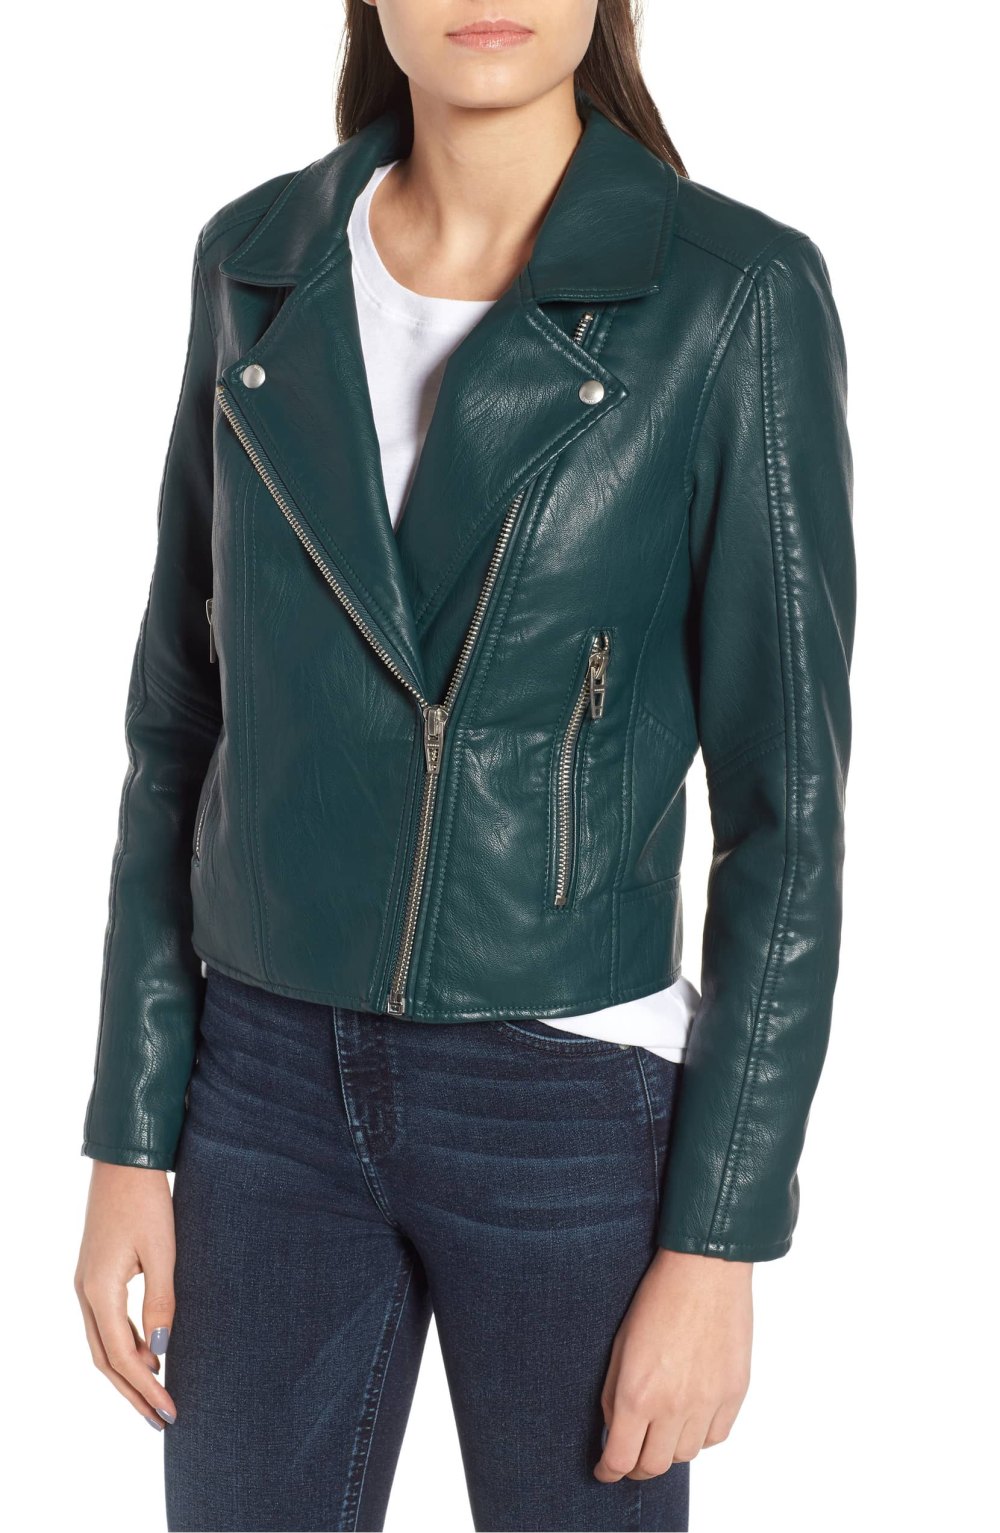 This Reader Favorite Jacket Is Fully Stocked in a Gorgeous Fall Shade ...